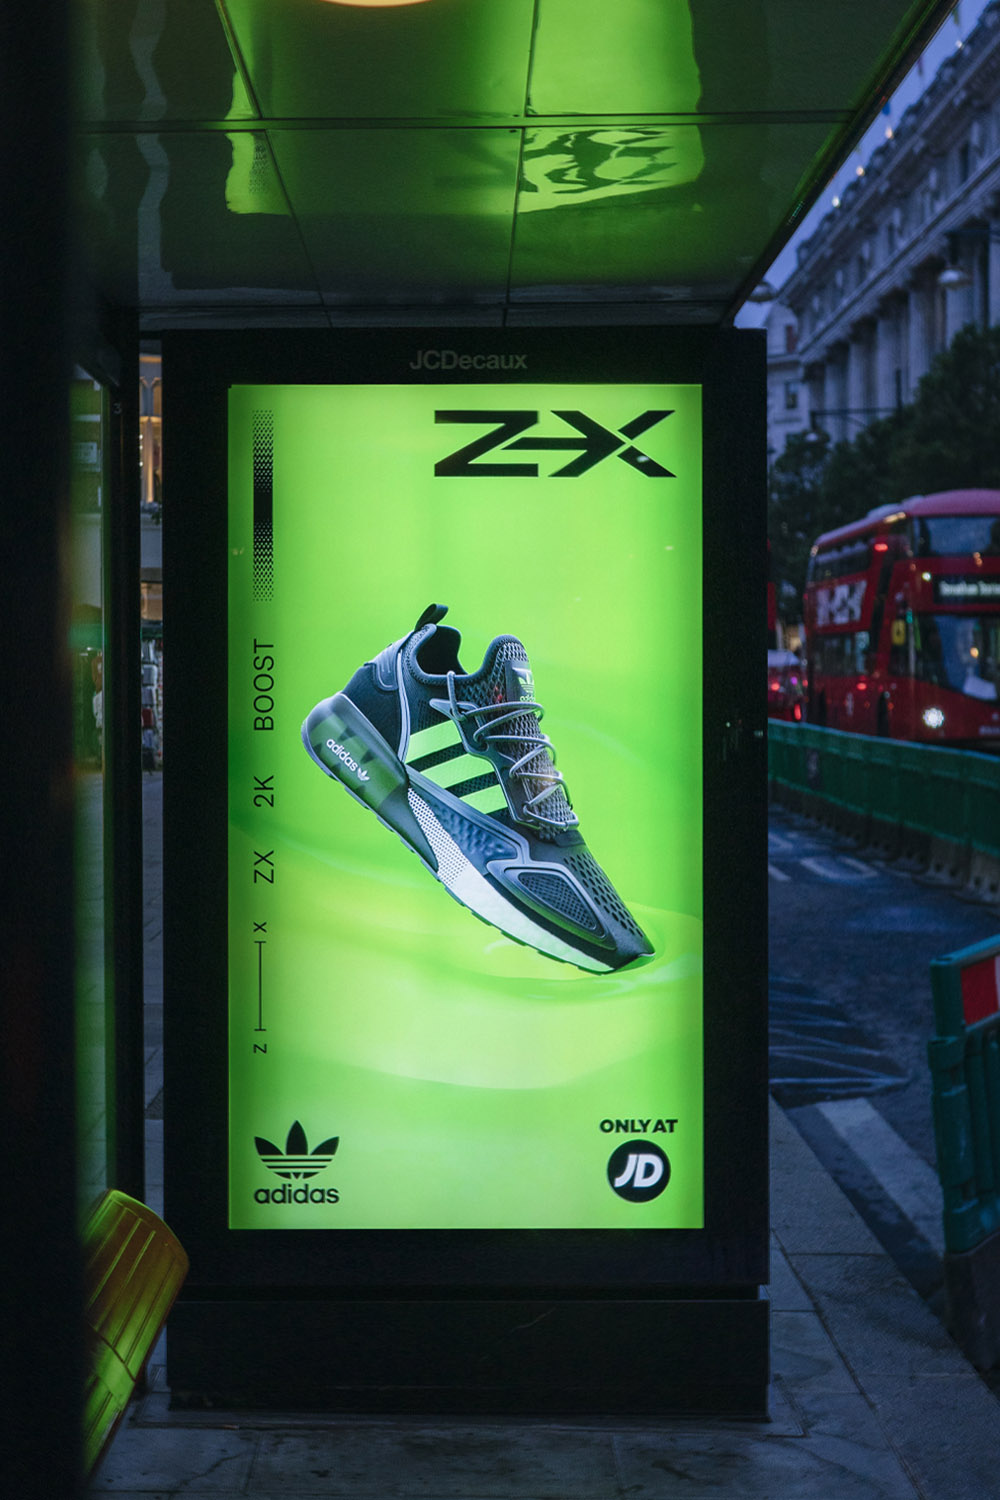 outdoor_london_busstop_adidas_Zx_triptych_03